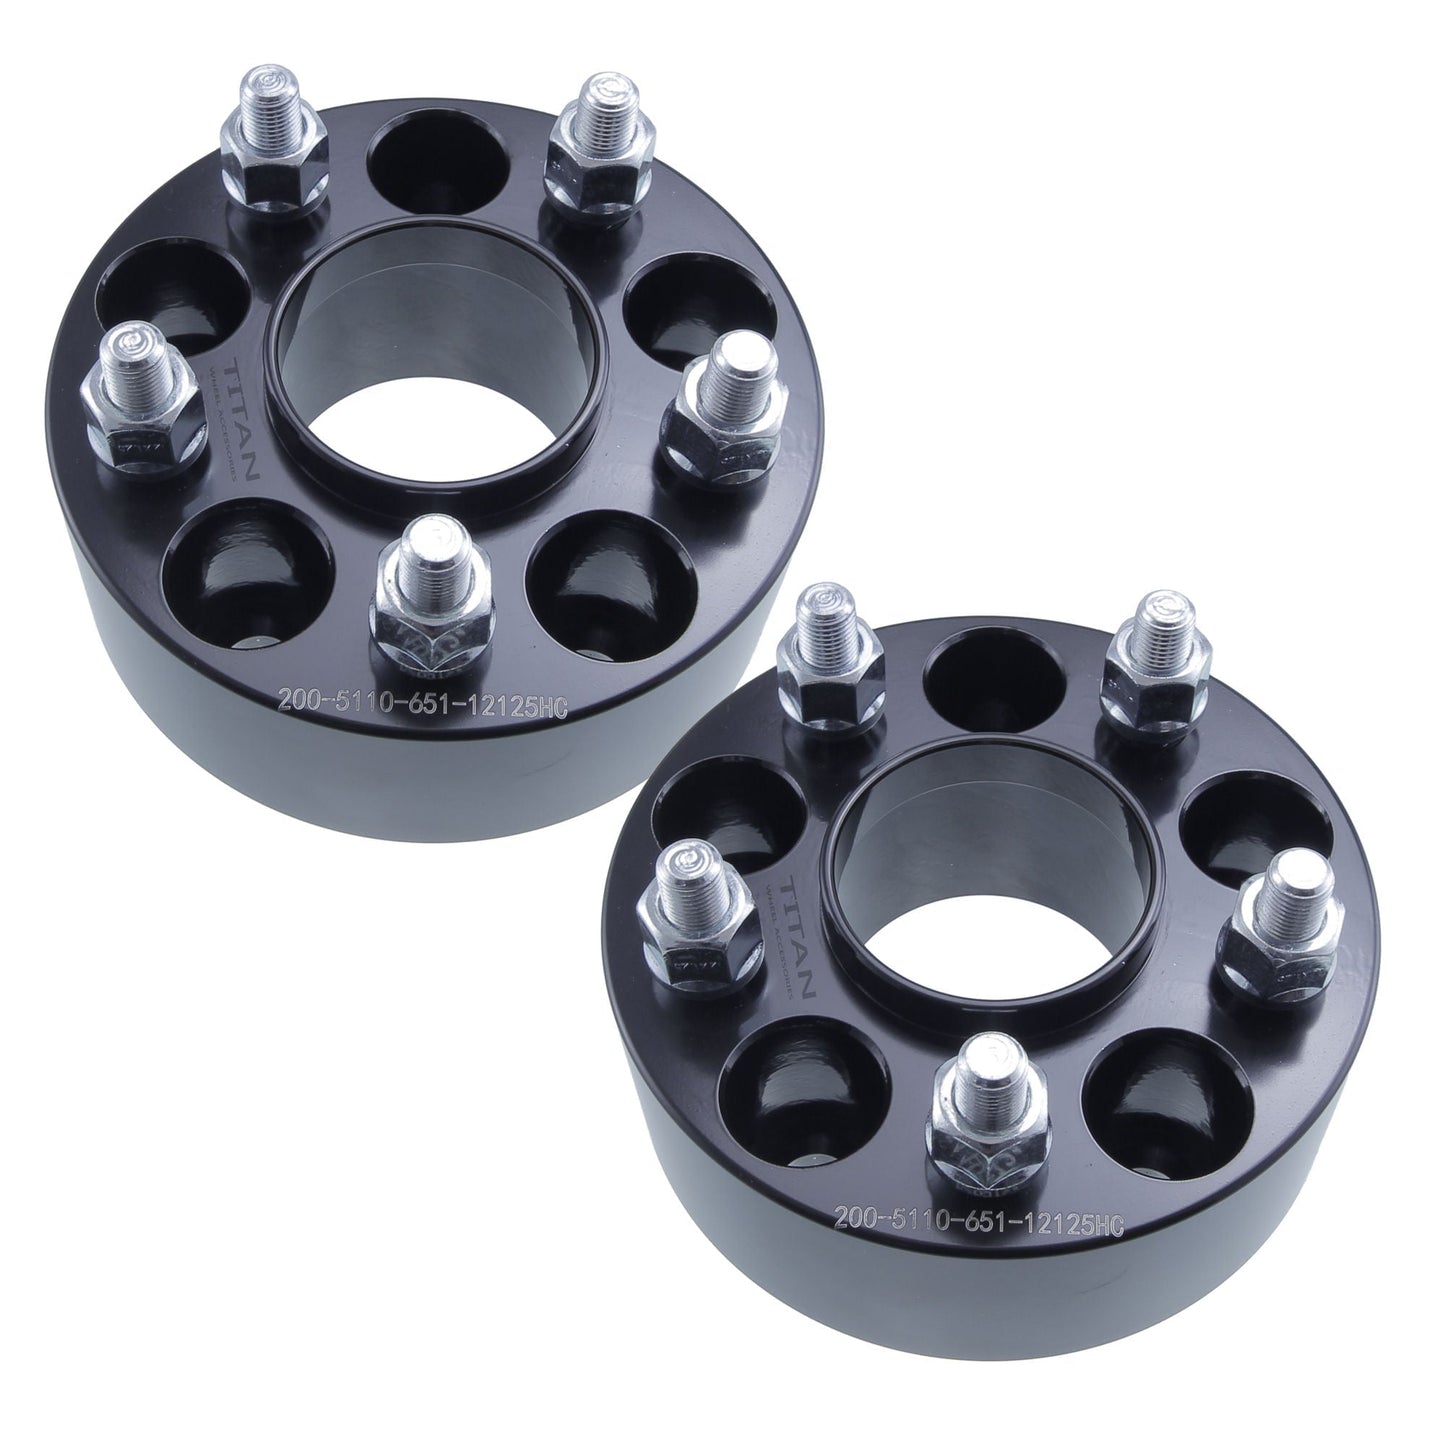 50mm (2") Titan Wheel Spacers for Jeep Cherokee Renegade | 5x110 | 65.1 Hubcentric |12x1.25 Studs | Set of 4 | Titan Wheel Accessories